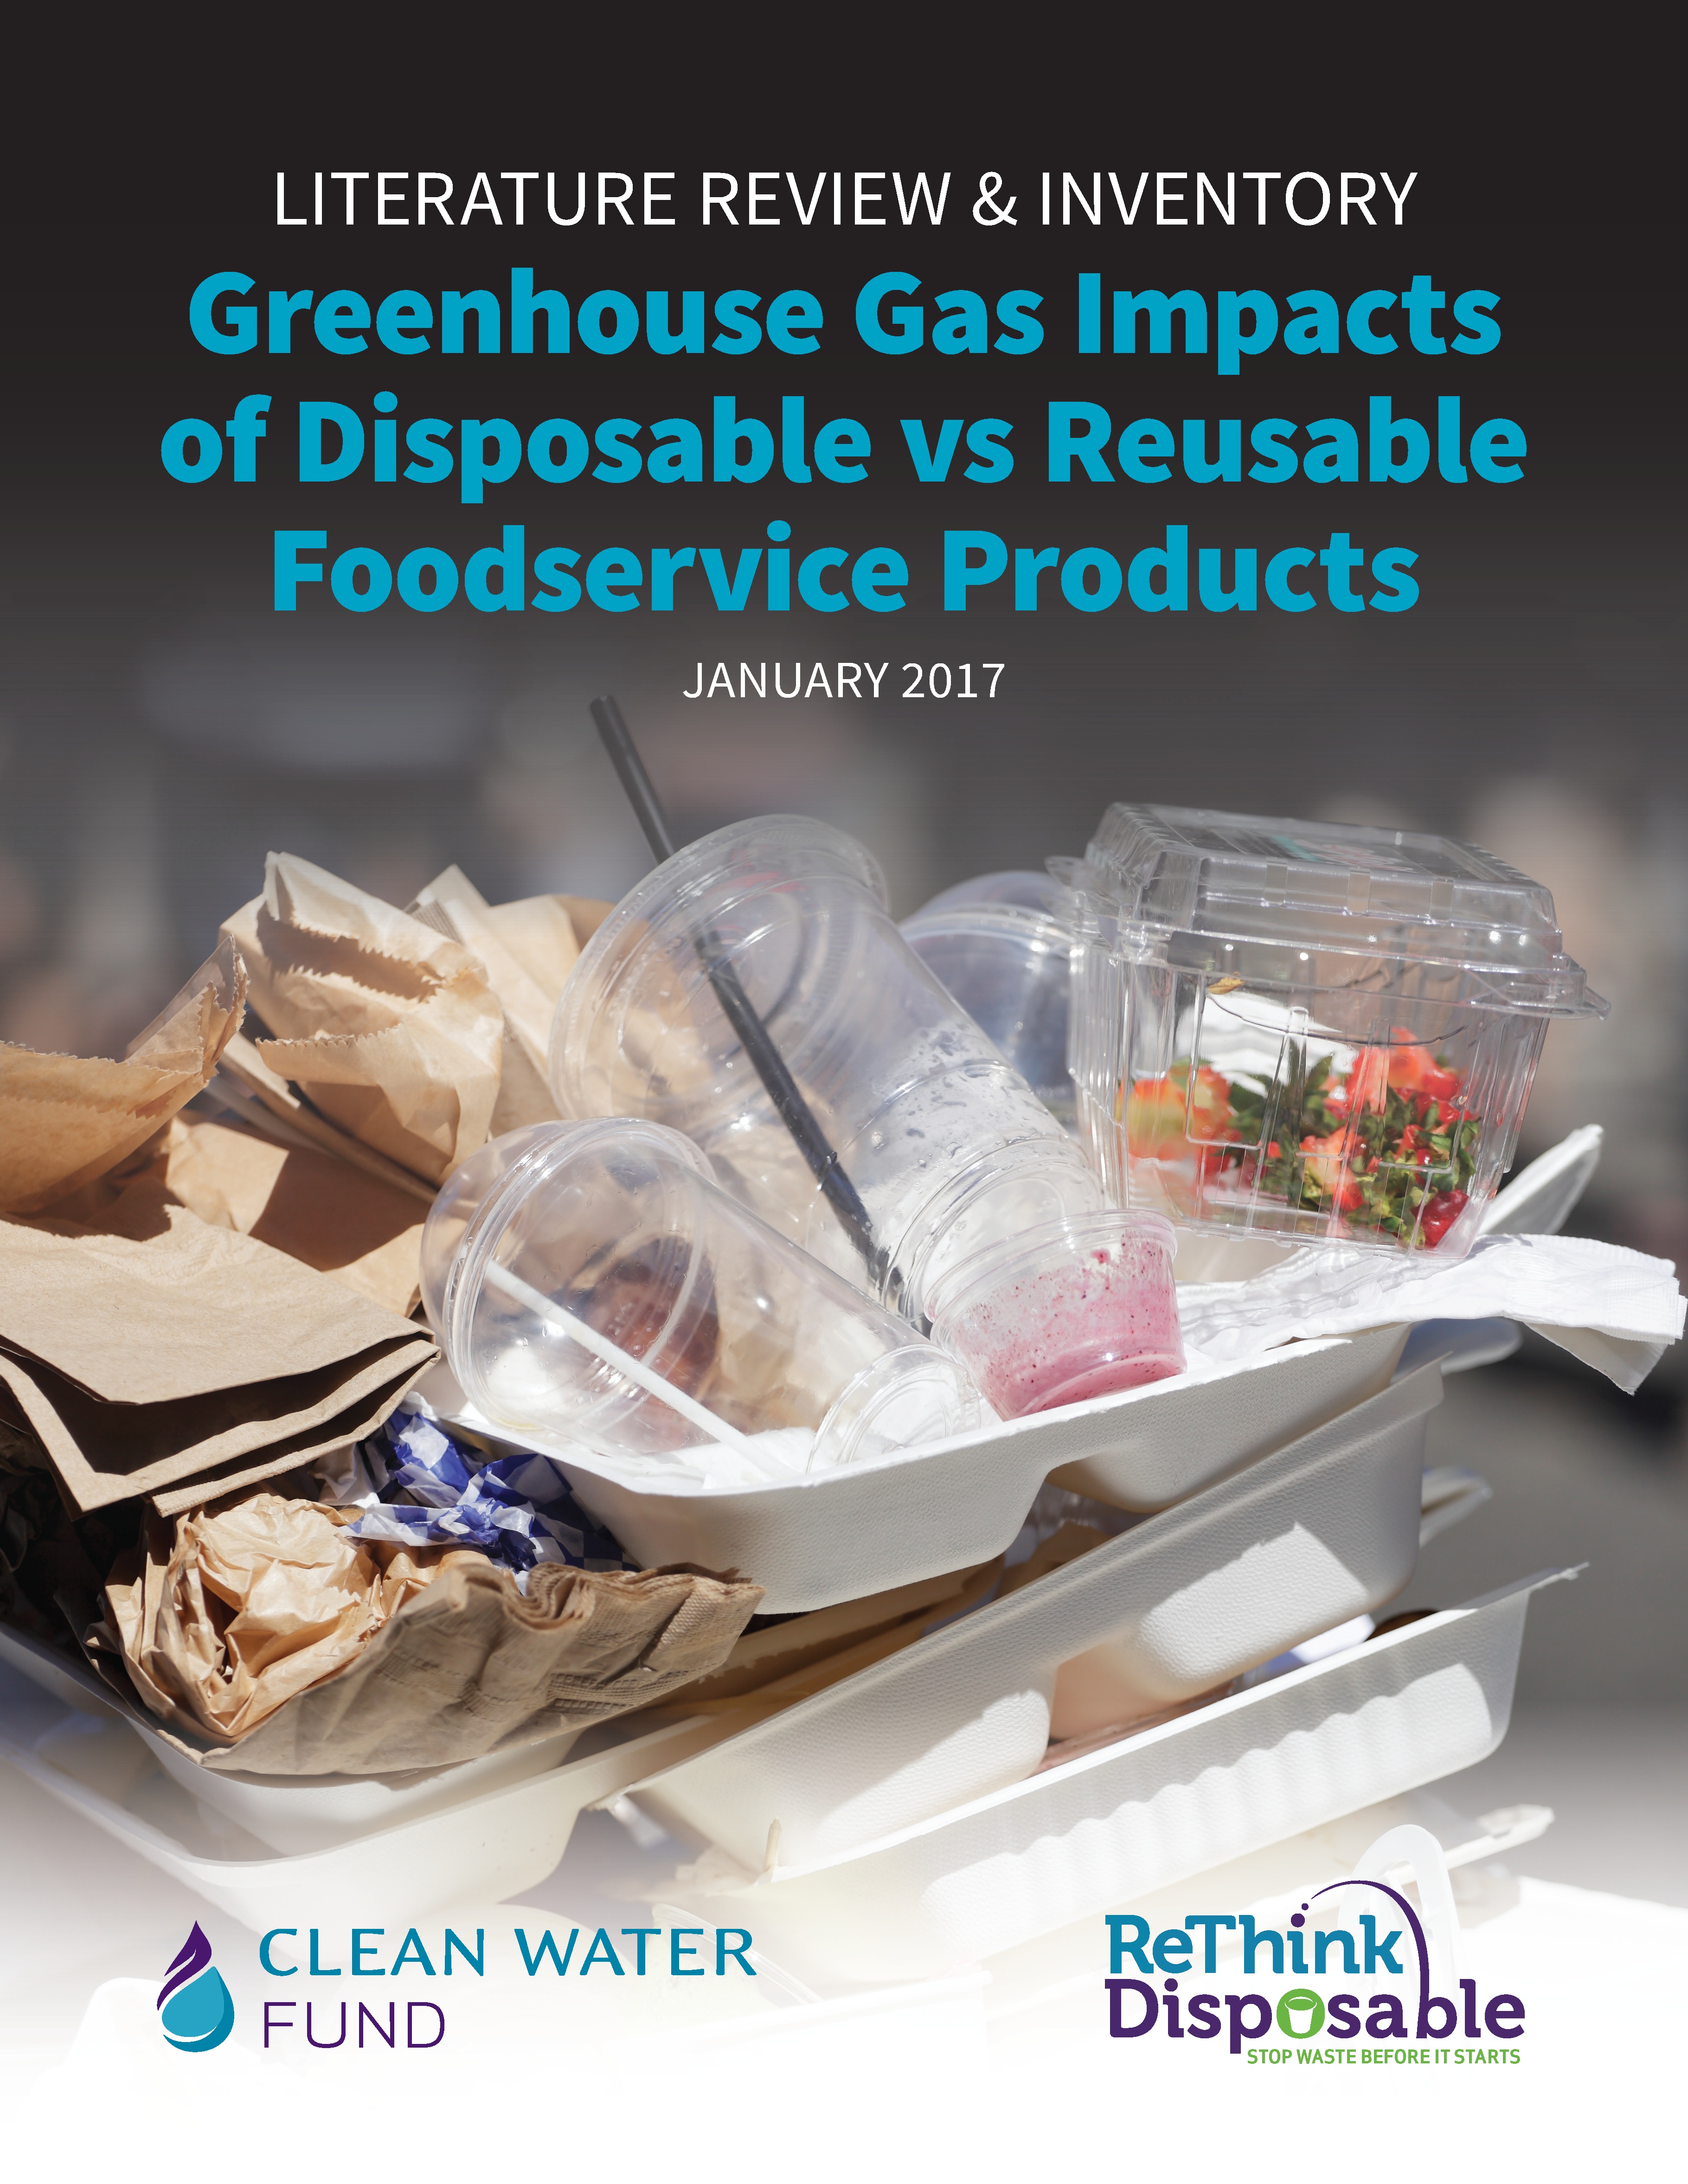 Greenhouse Gas Impacts of Disposable vs Reusable Foodservice Products